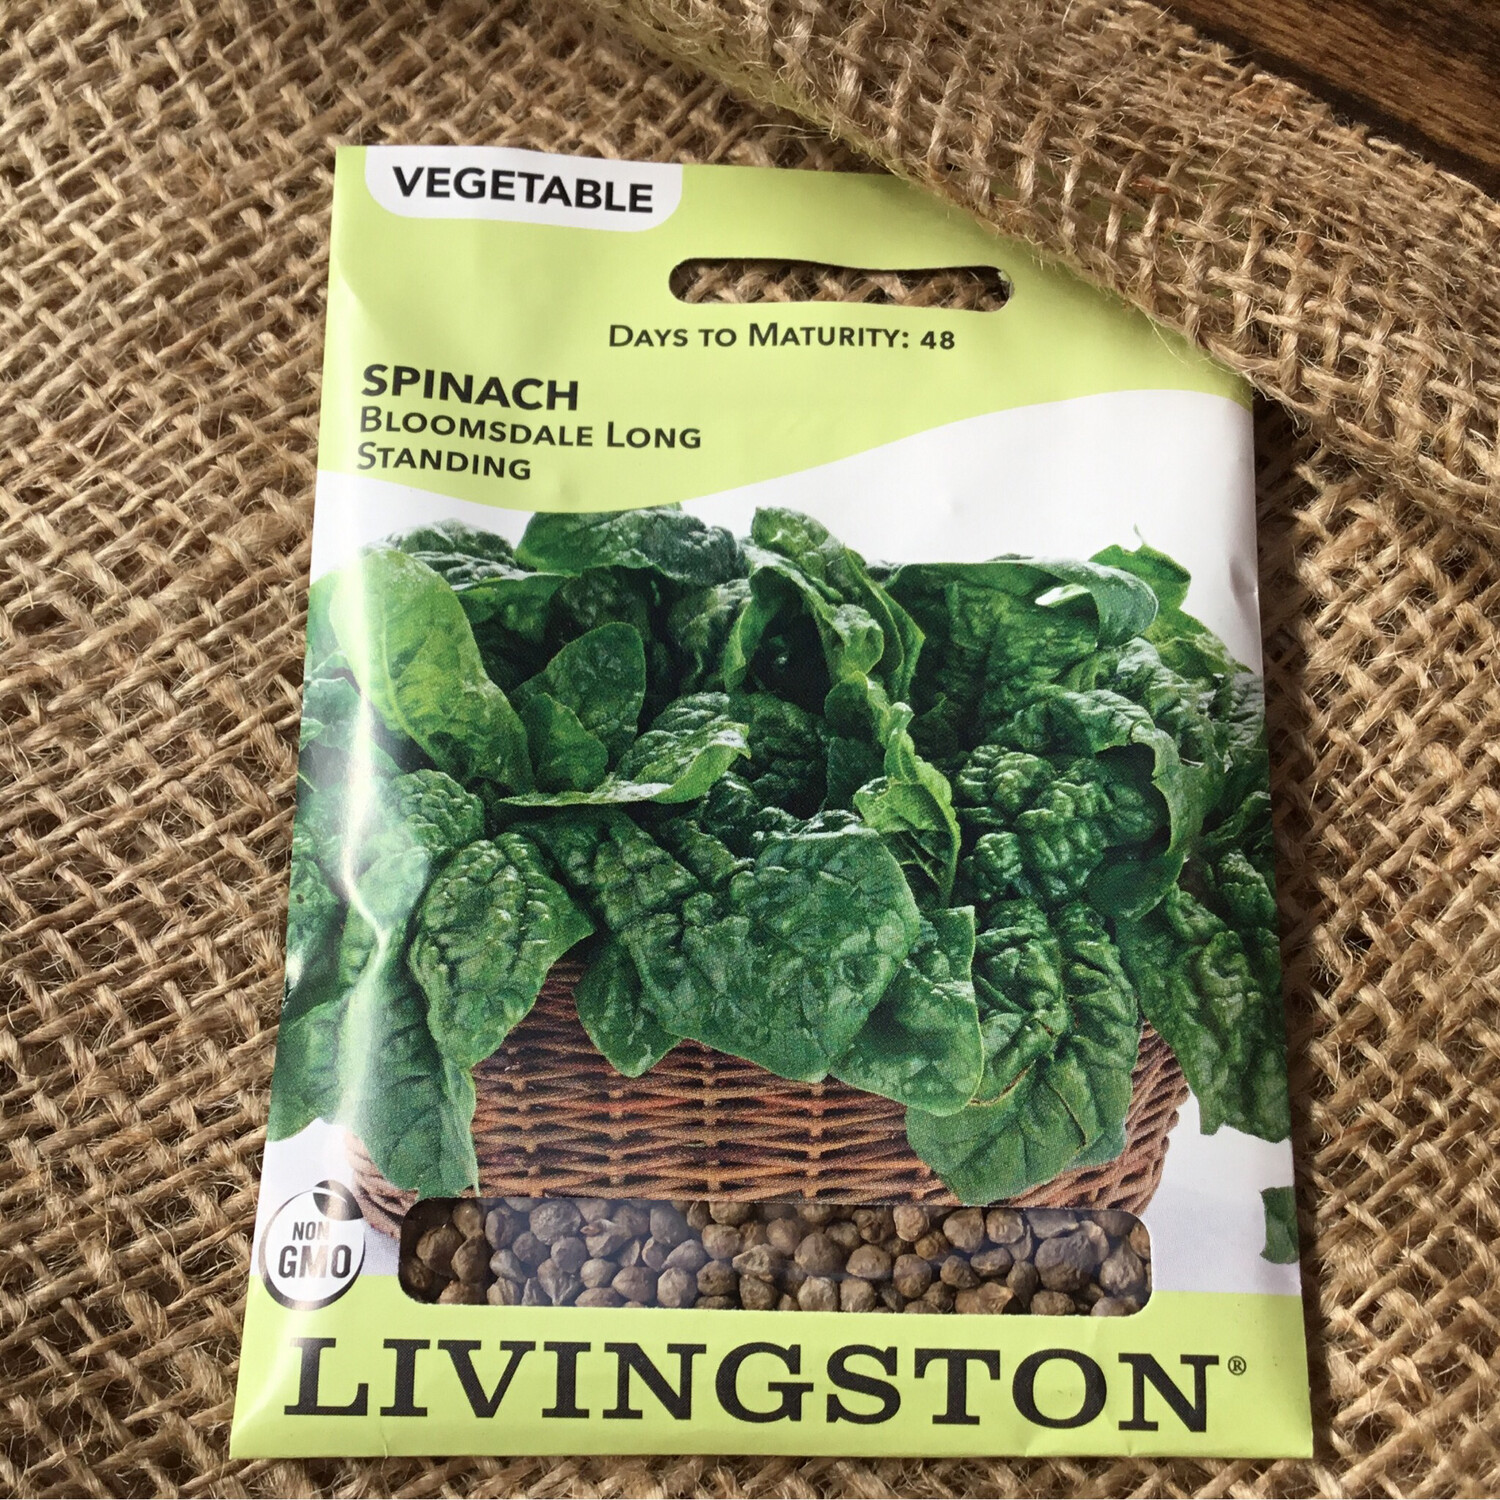 (Seed) Spinach Bloomsdale Long Standing $2.99